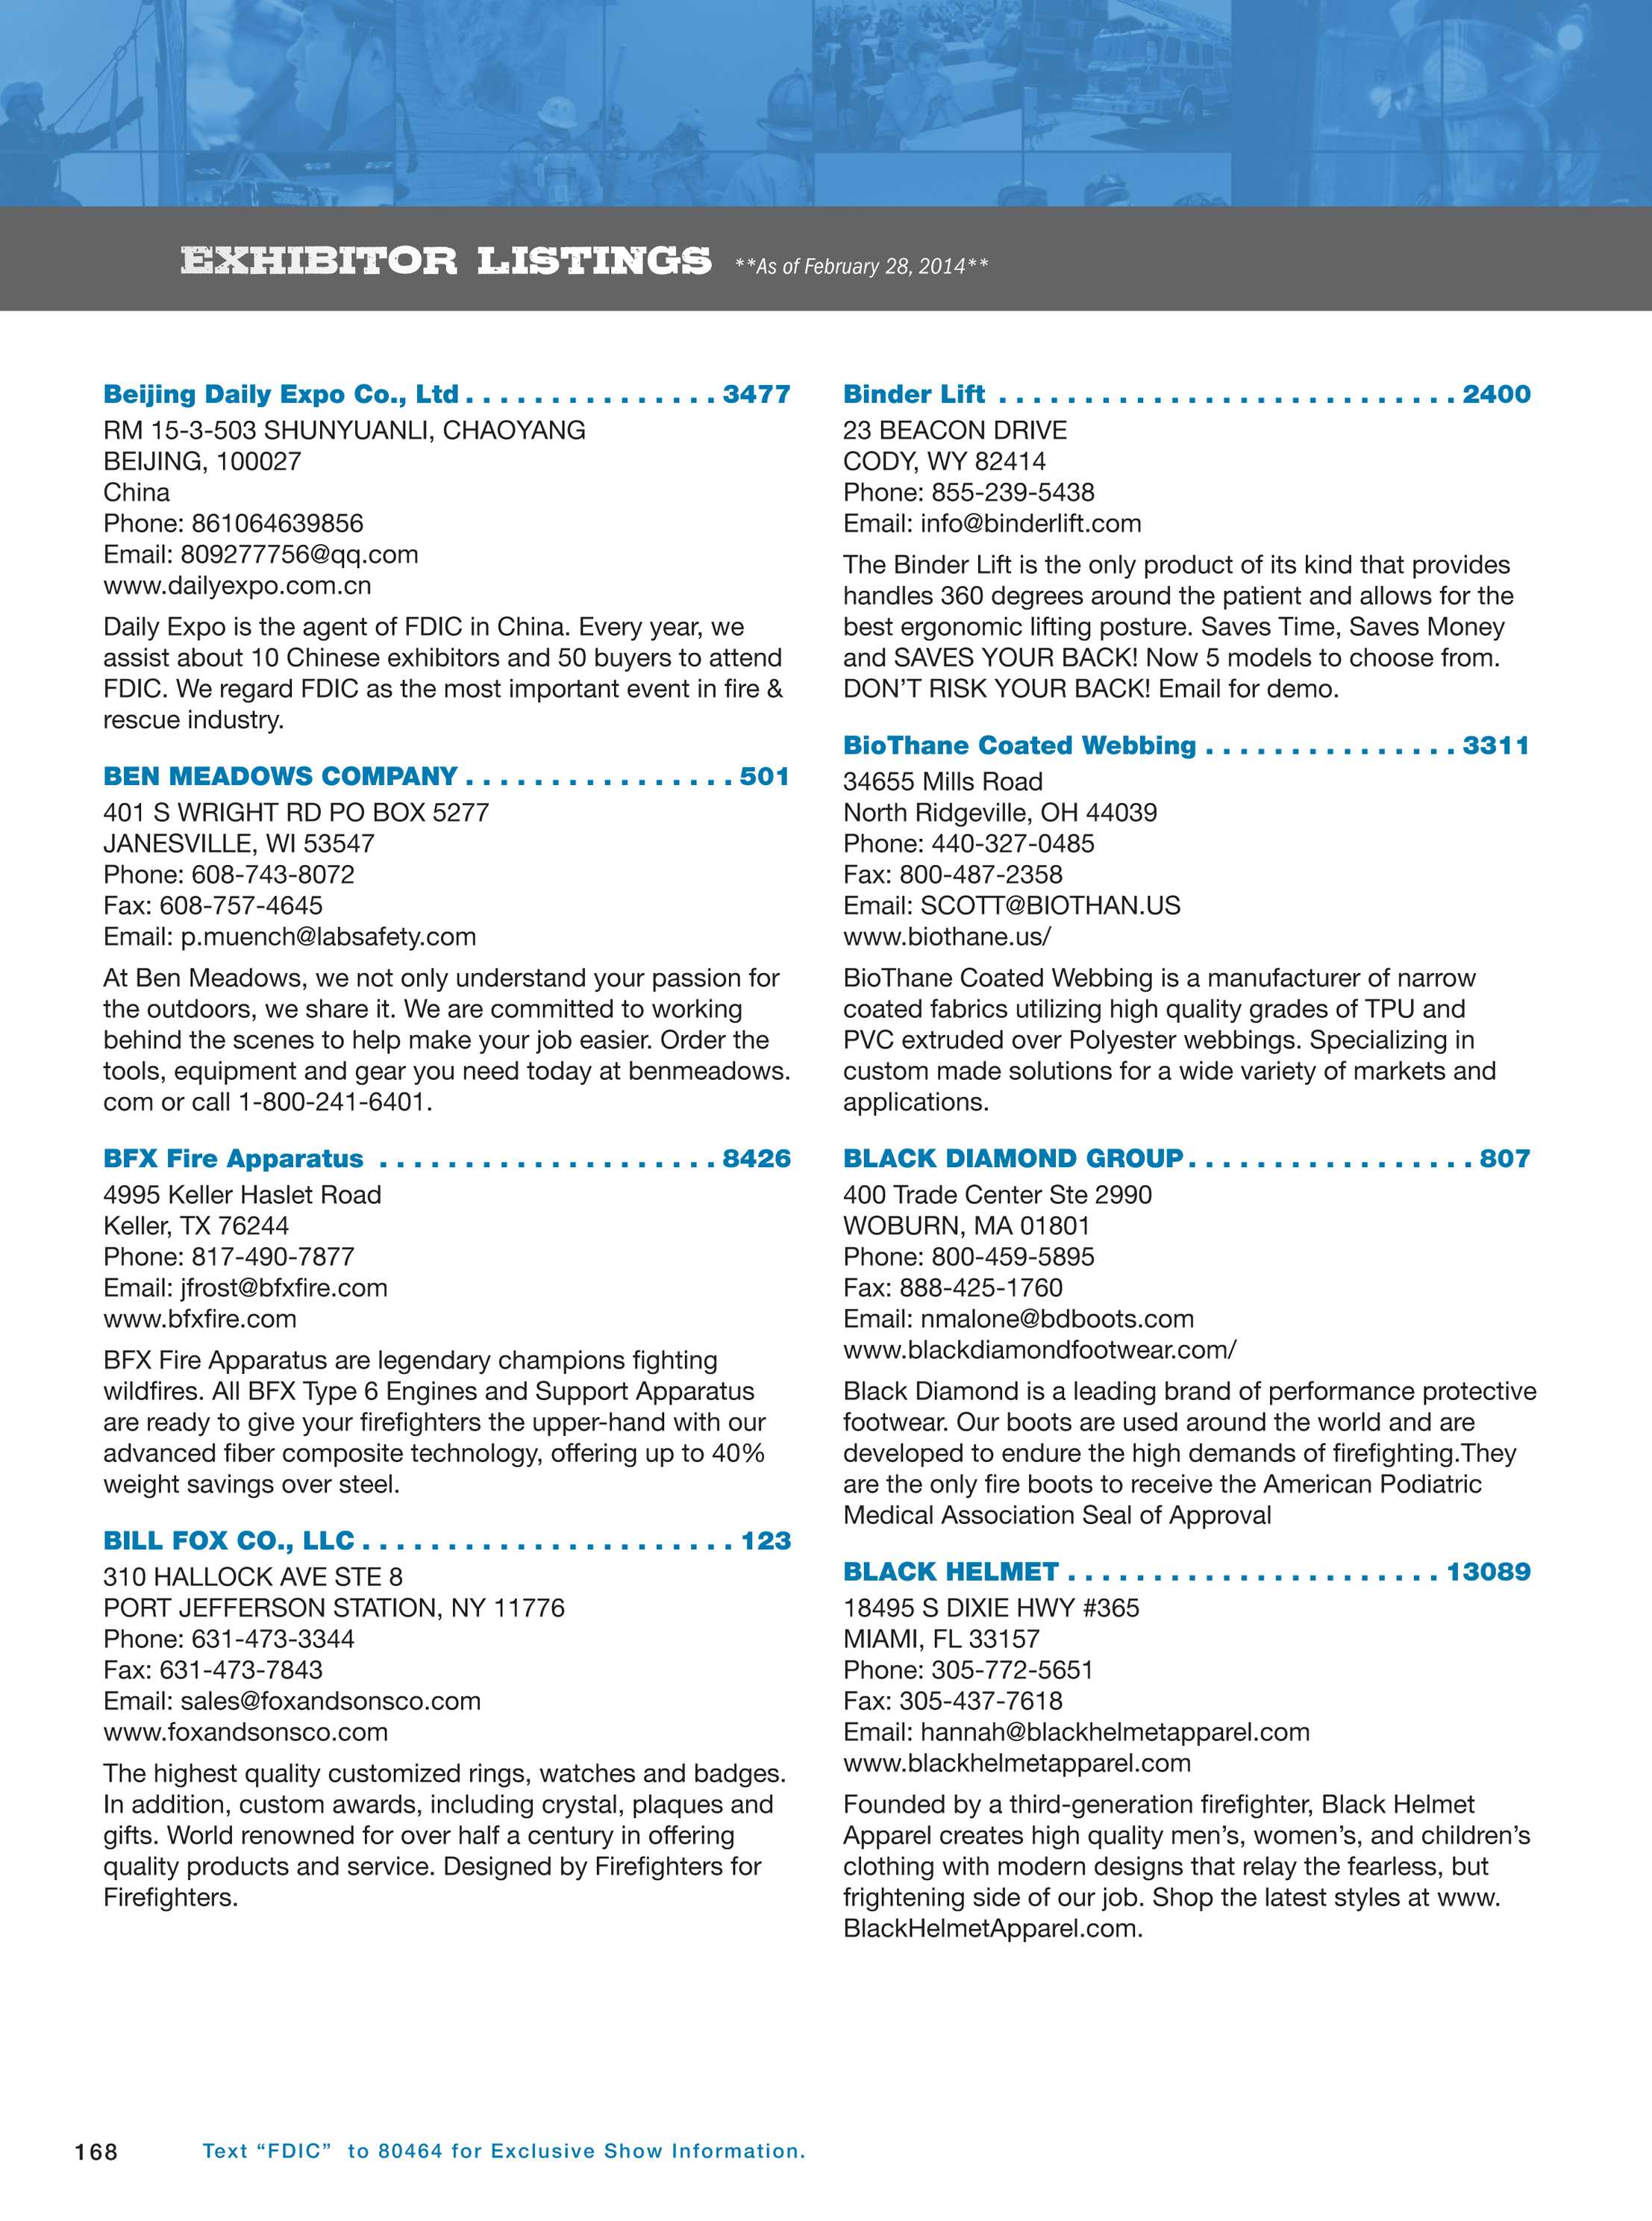 Pennwell Supplements Fdic 2014 Show Guide Page 168